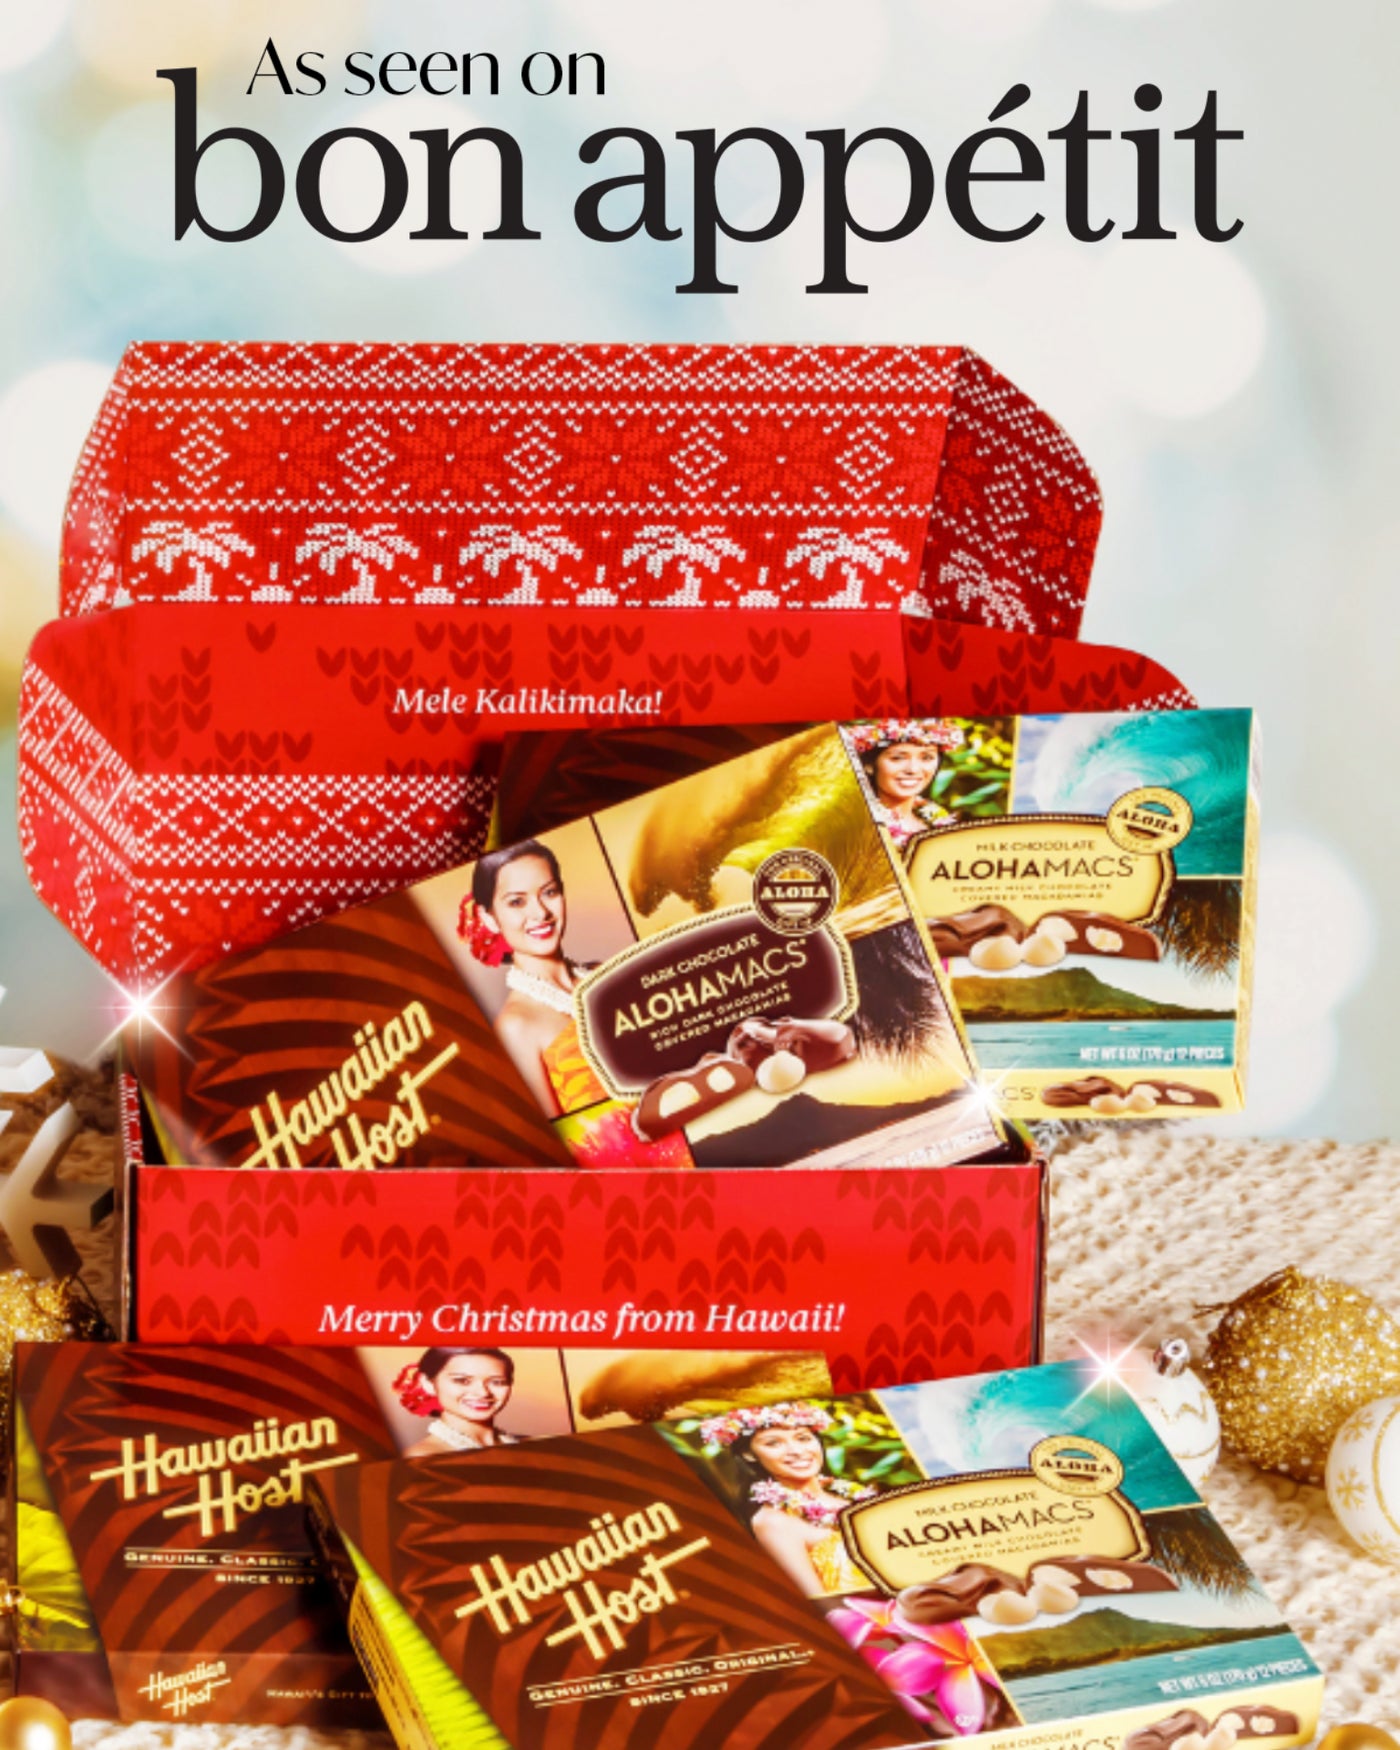 Bon Appétit: The Nut Lovers Gift Guide